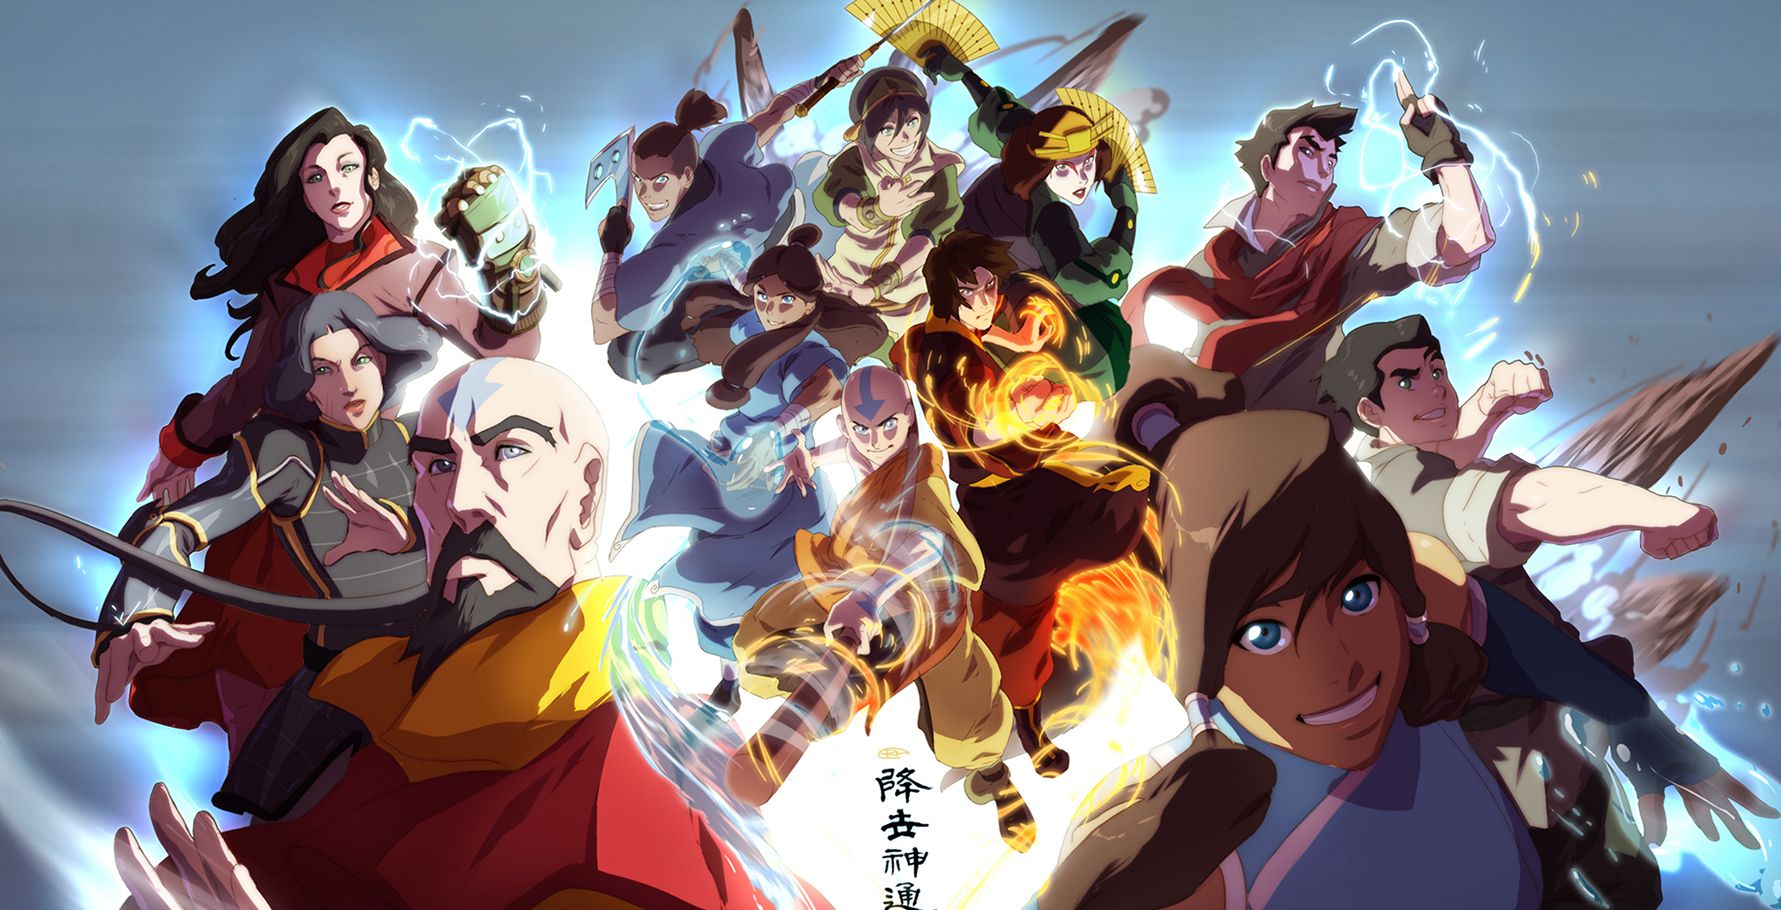 15 Actors You Forgot Voiced Characters On Avatar And Legend Of Korra